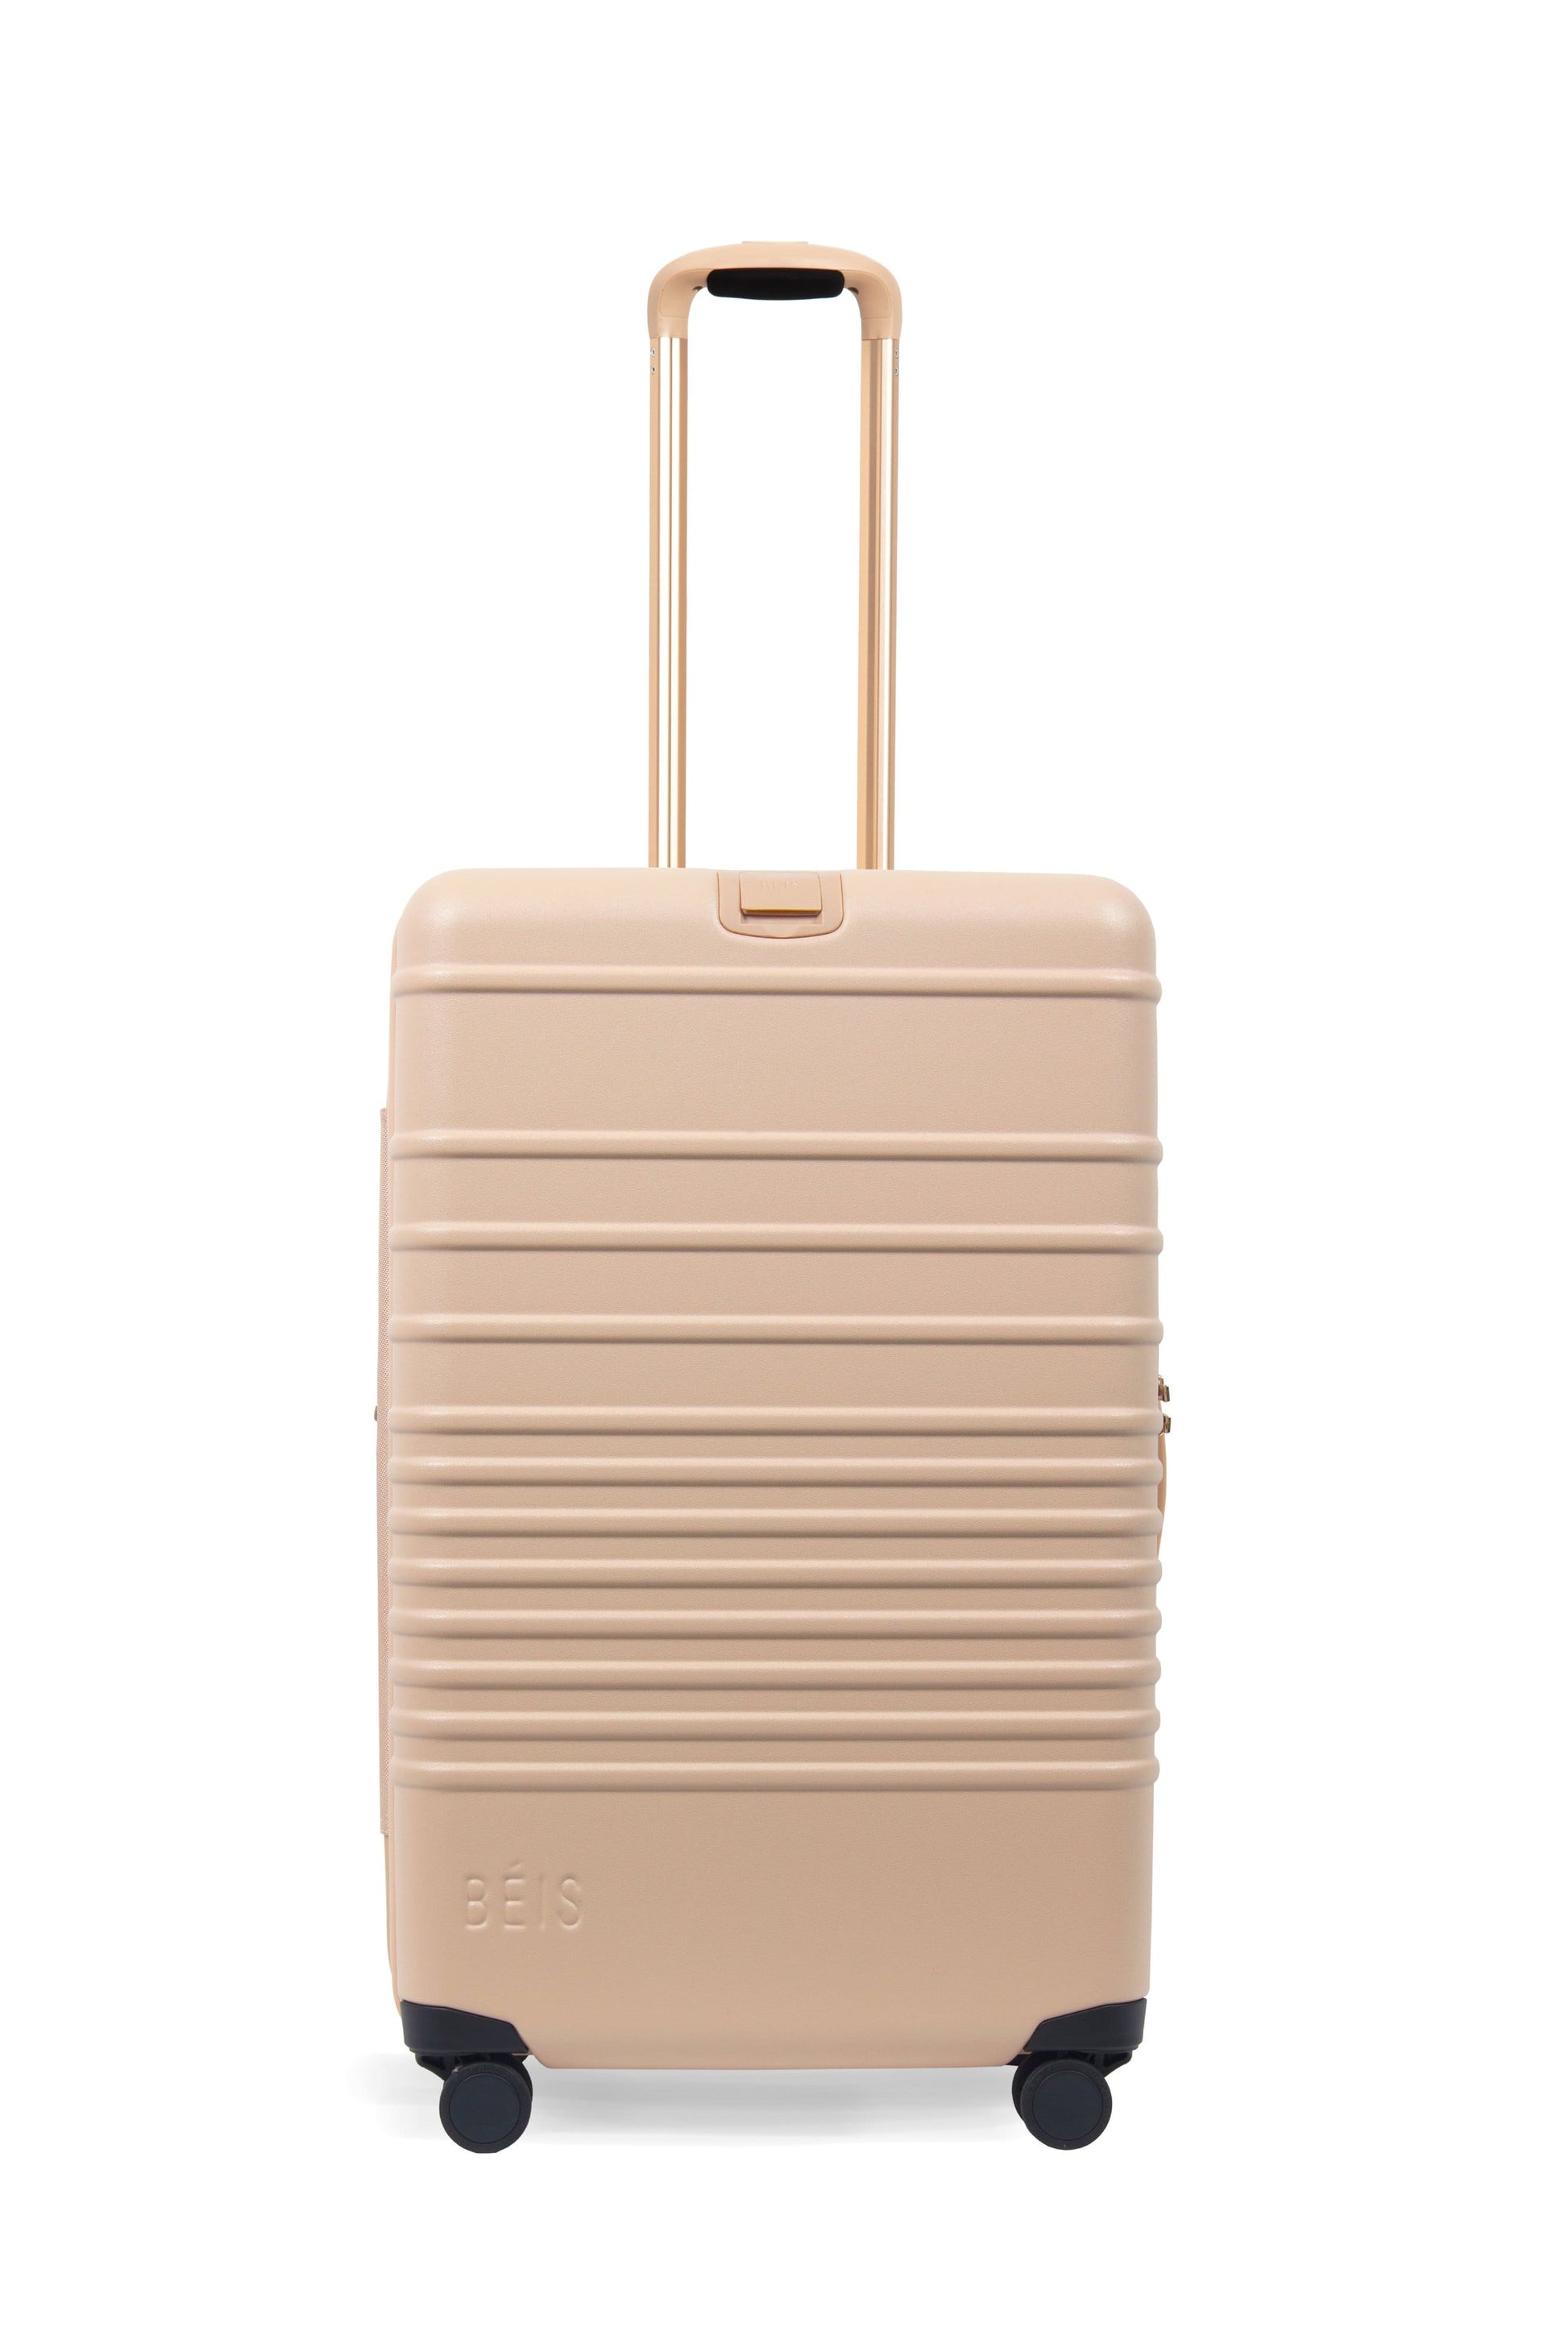 BEIS by Shay Mitchell | The 26" Check-In Roller in Beige (Product Image - front with handle )